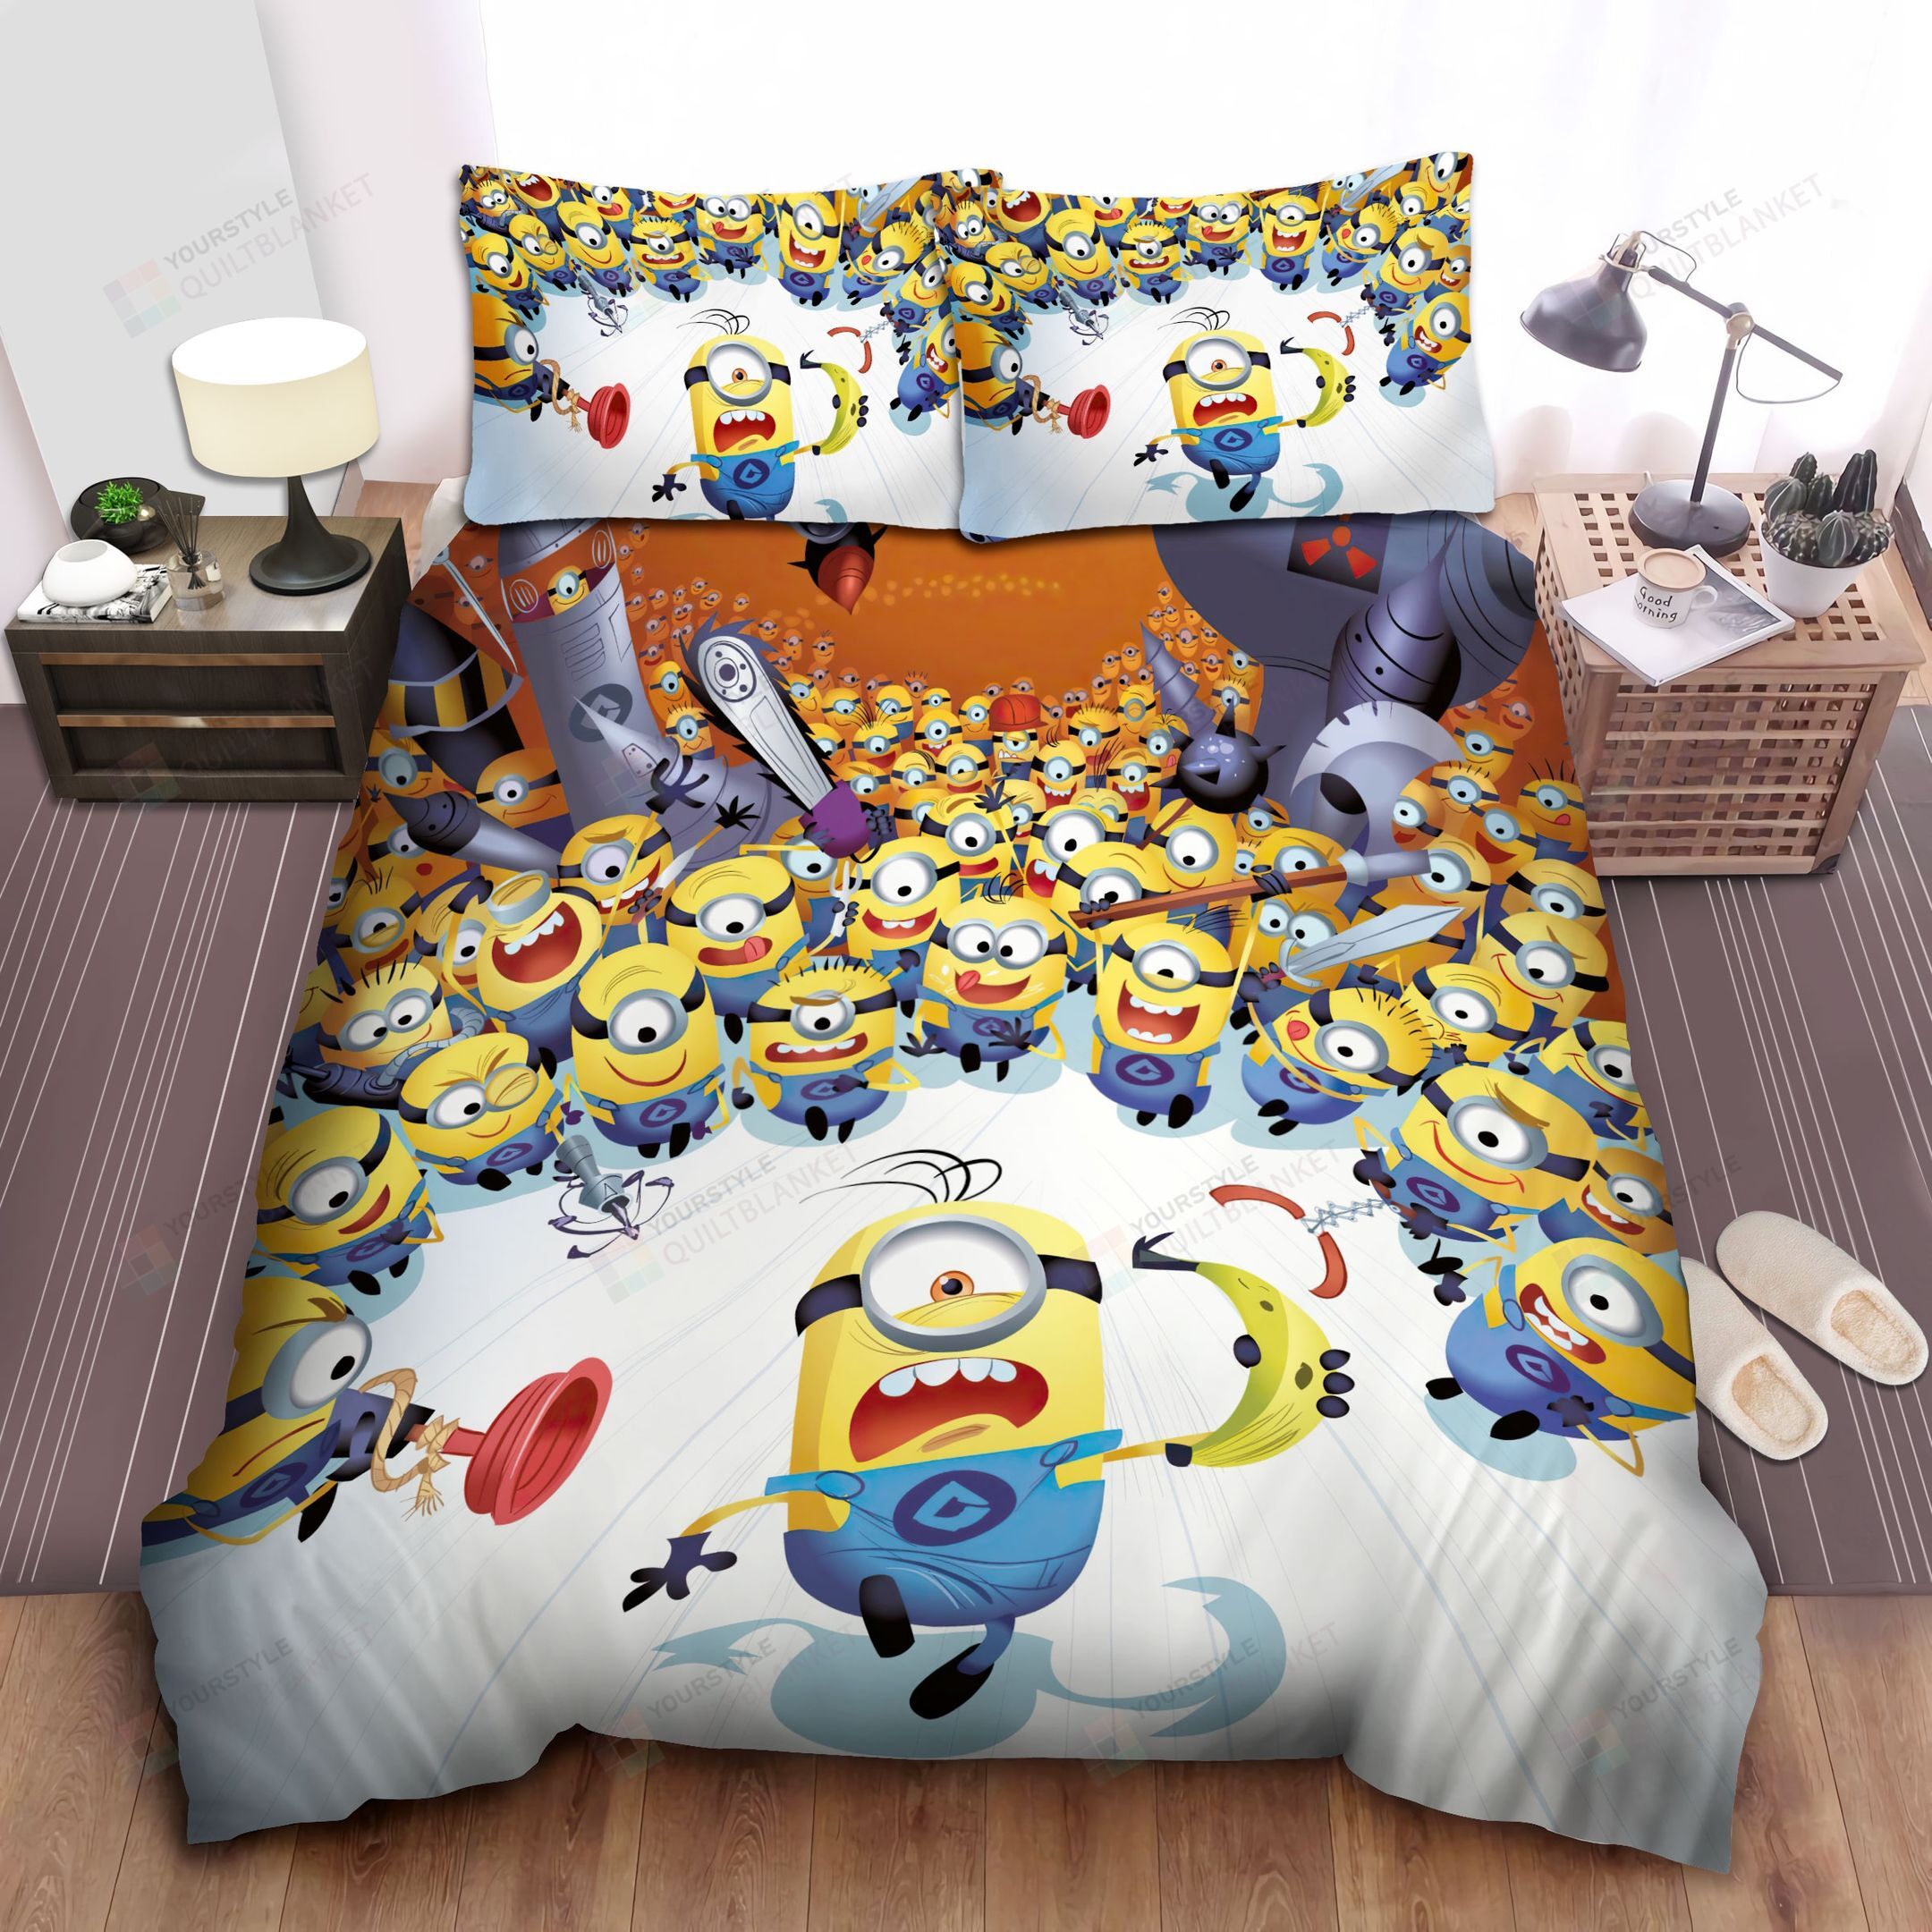 Minion In Despicable Me, Running For Banana  Bed Sheets Spread Comforter Duvet Cover Bedding Sets